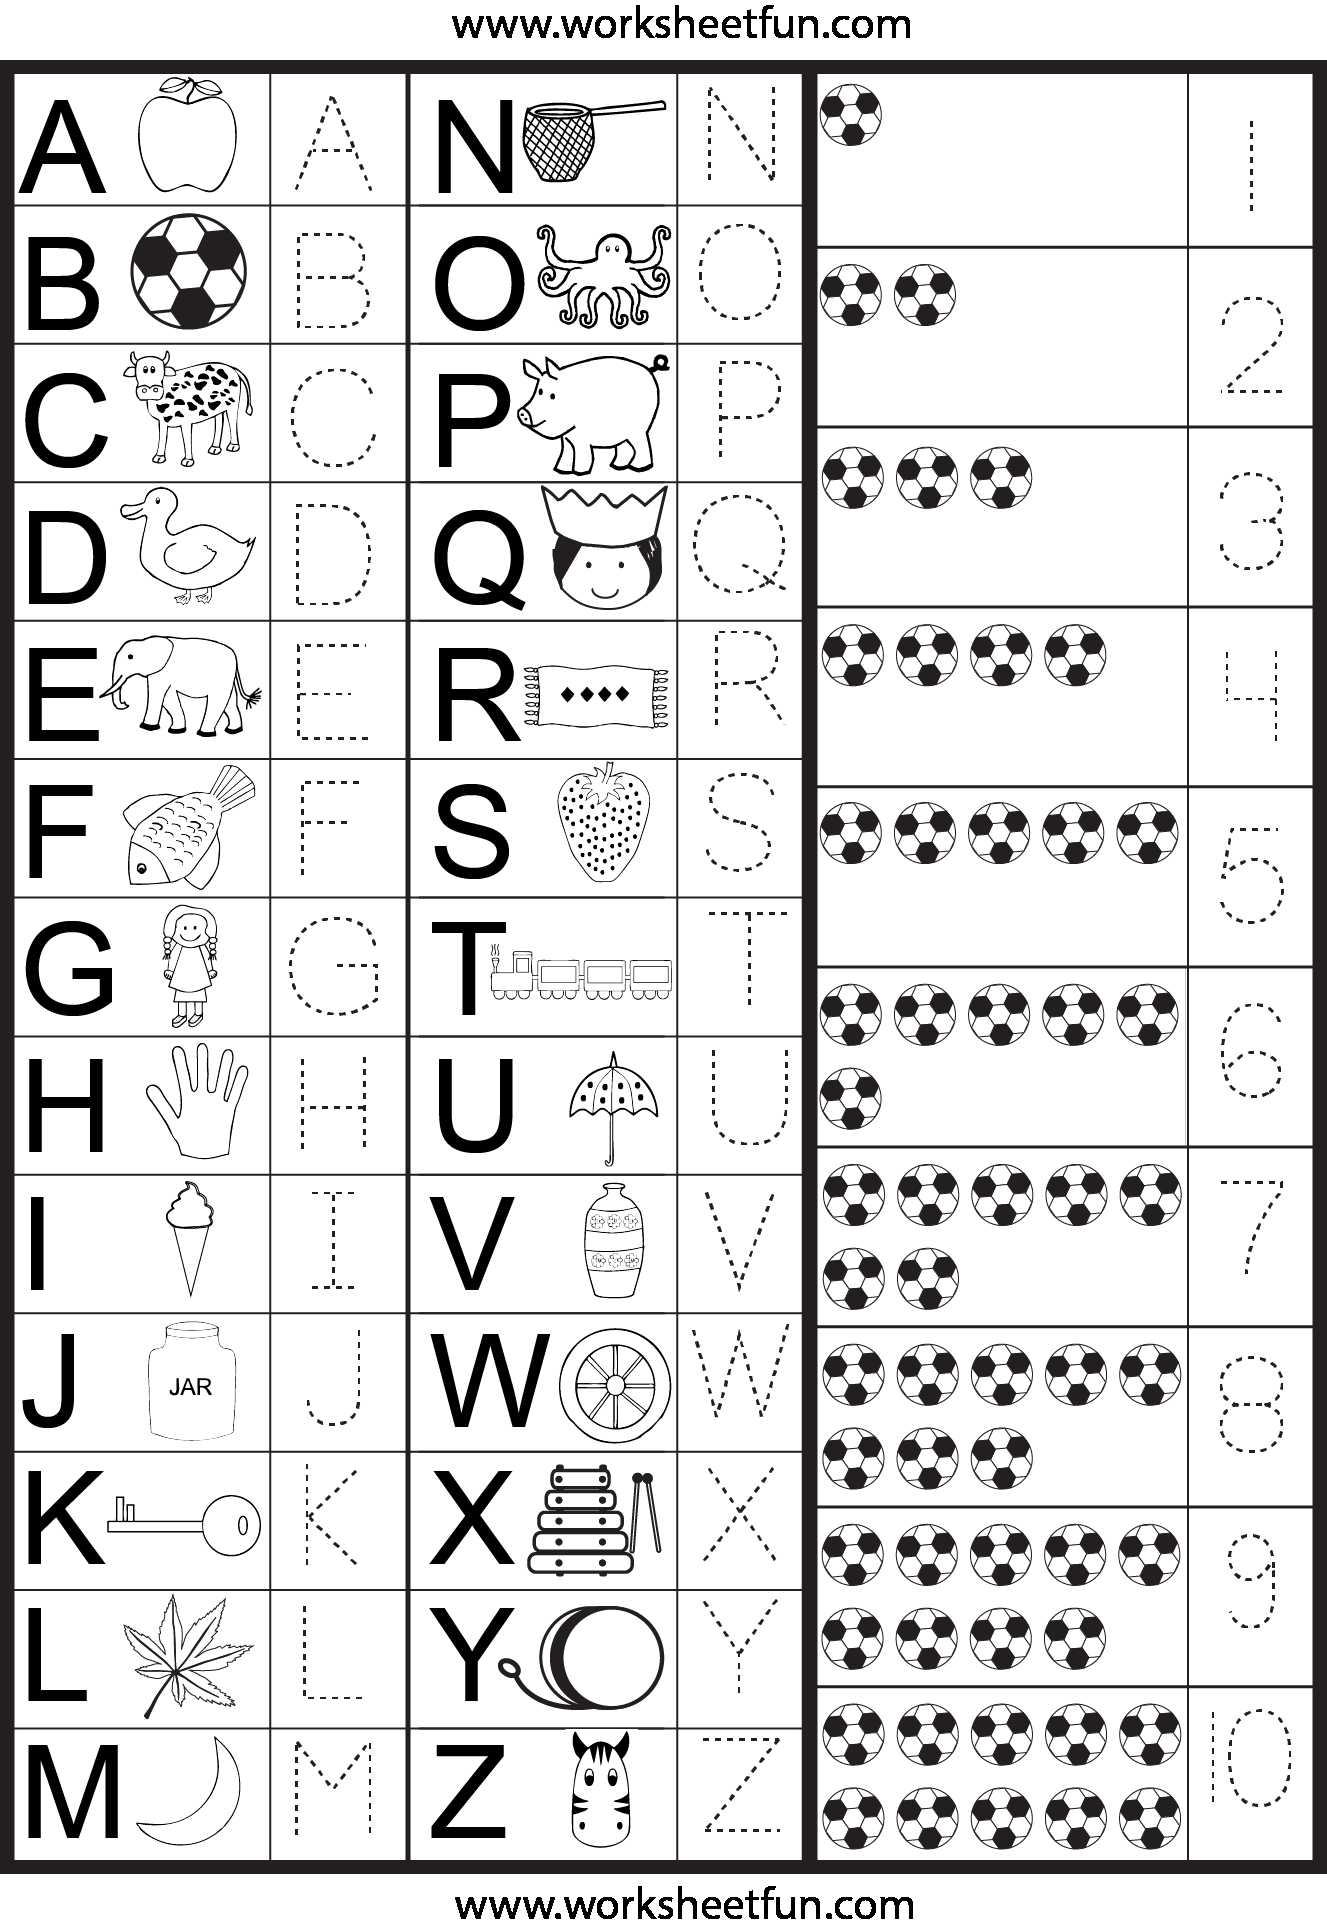 Traceable Name Worksheets together with Letters & Numbers Tracing Worksheet